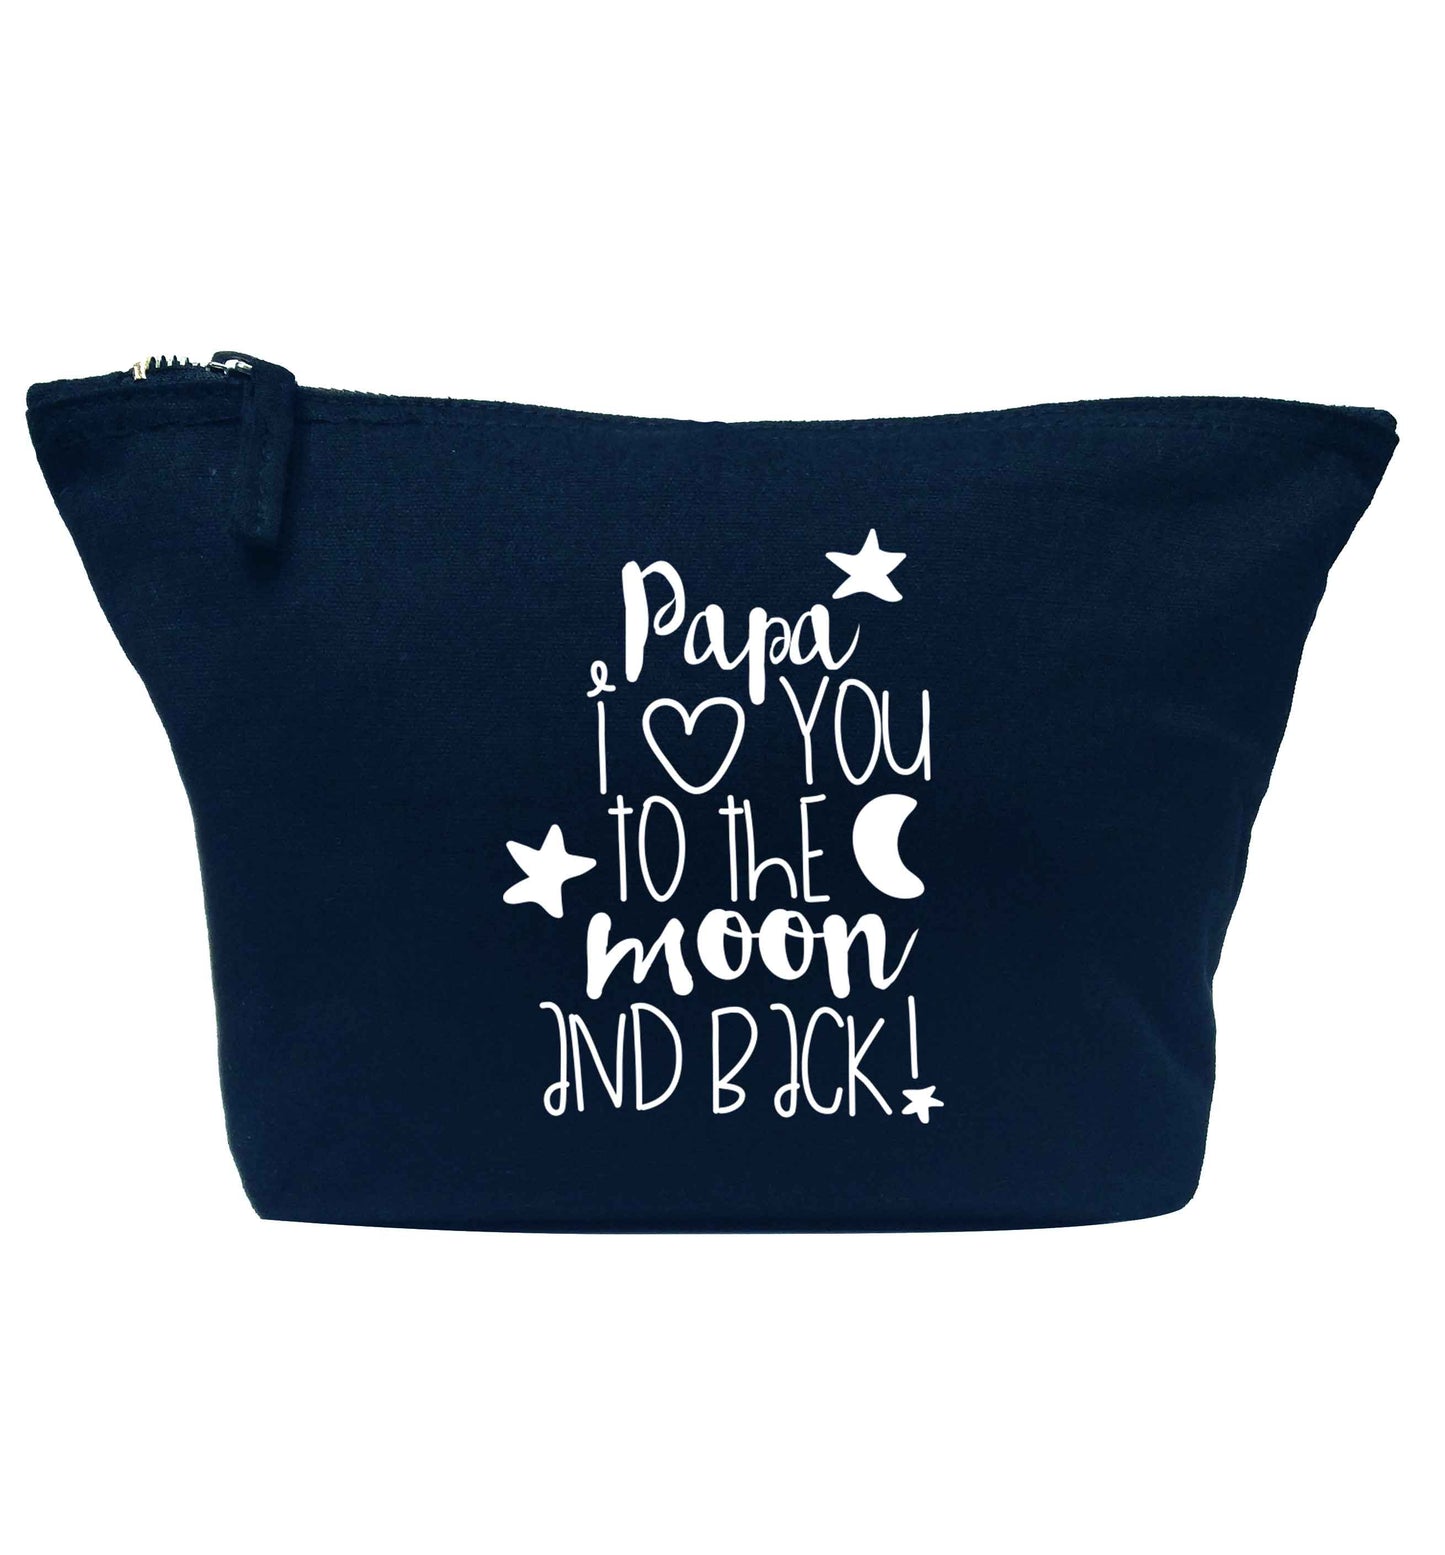 Papa I love you to the moon and back navy makeup bag